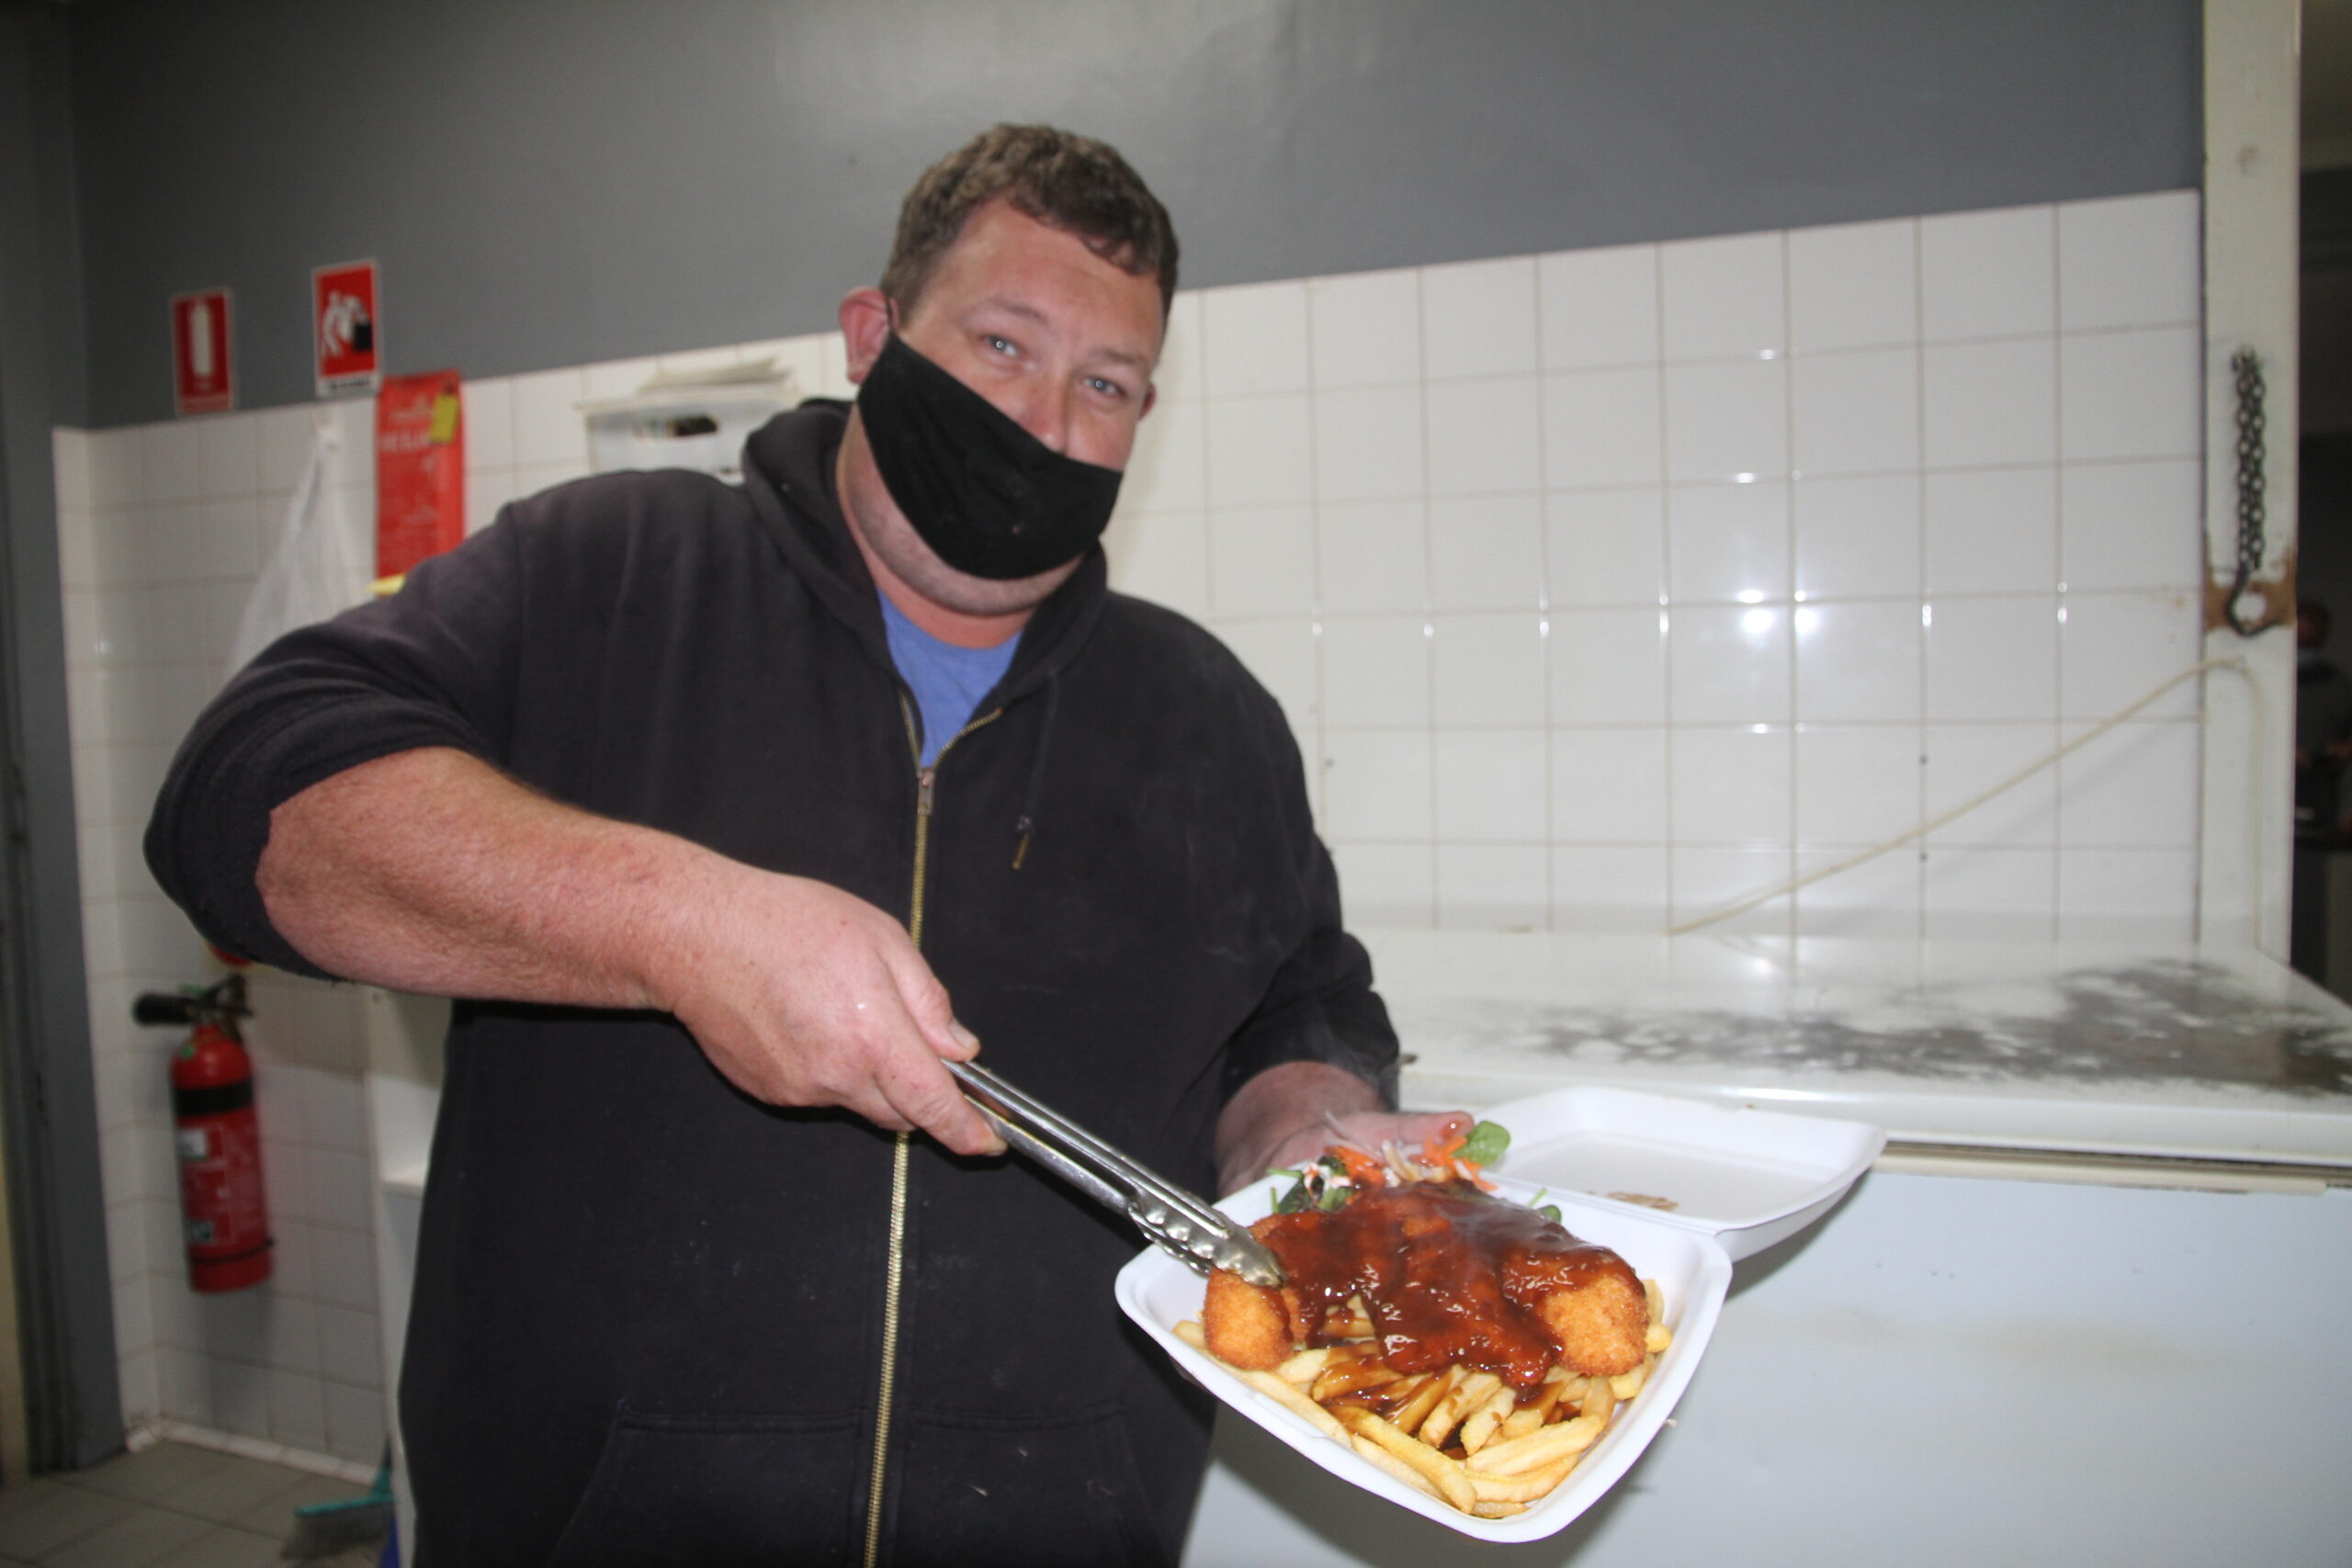 Todd Manton serves up a chicken schnitzel as part of the Namoi Hotel’s take-away service during lockdown.